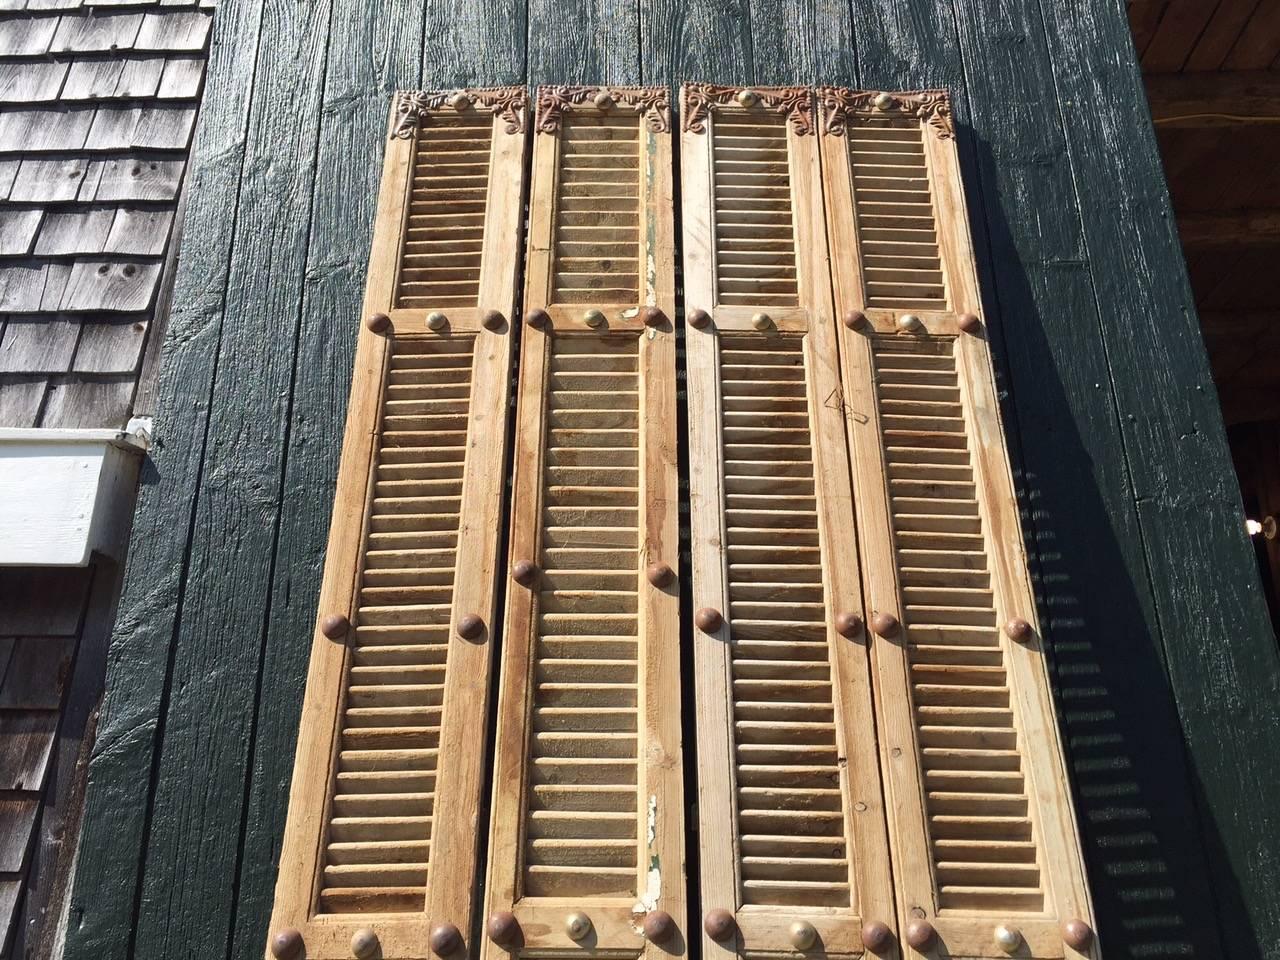 Two pairs of wonderful very tall elongated French shutters with lovely decorative metal embellishments and interesting raised bumps that are metal ornamentation. The wood is natural and unpainted. The metal décor is unusual and gorgeous. Bought in